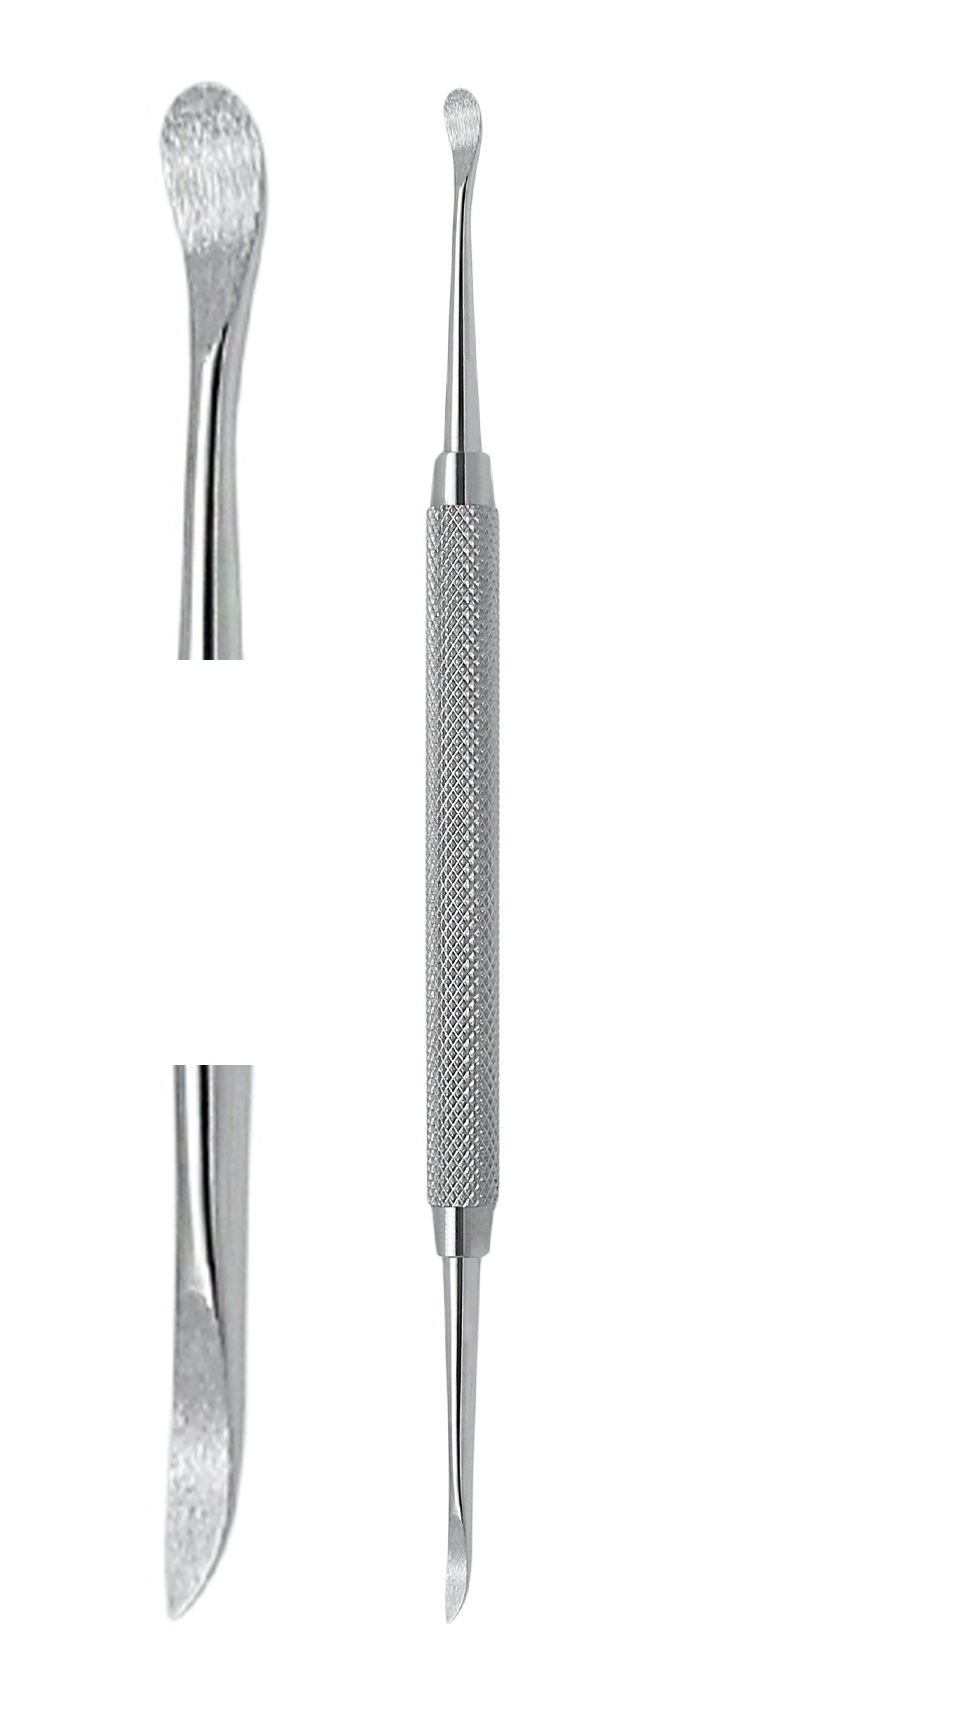 Excellent corner lifter and cuticle pusher